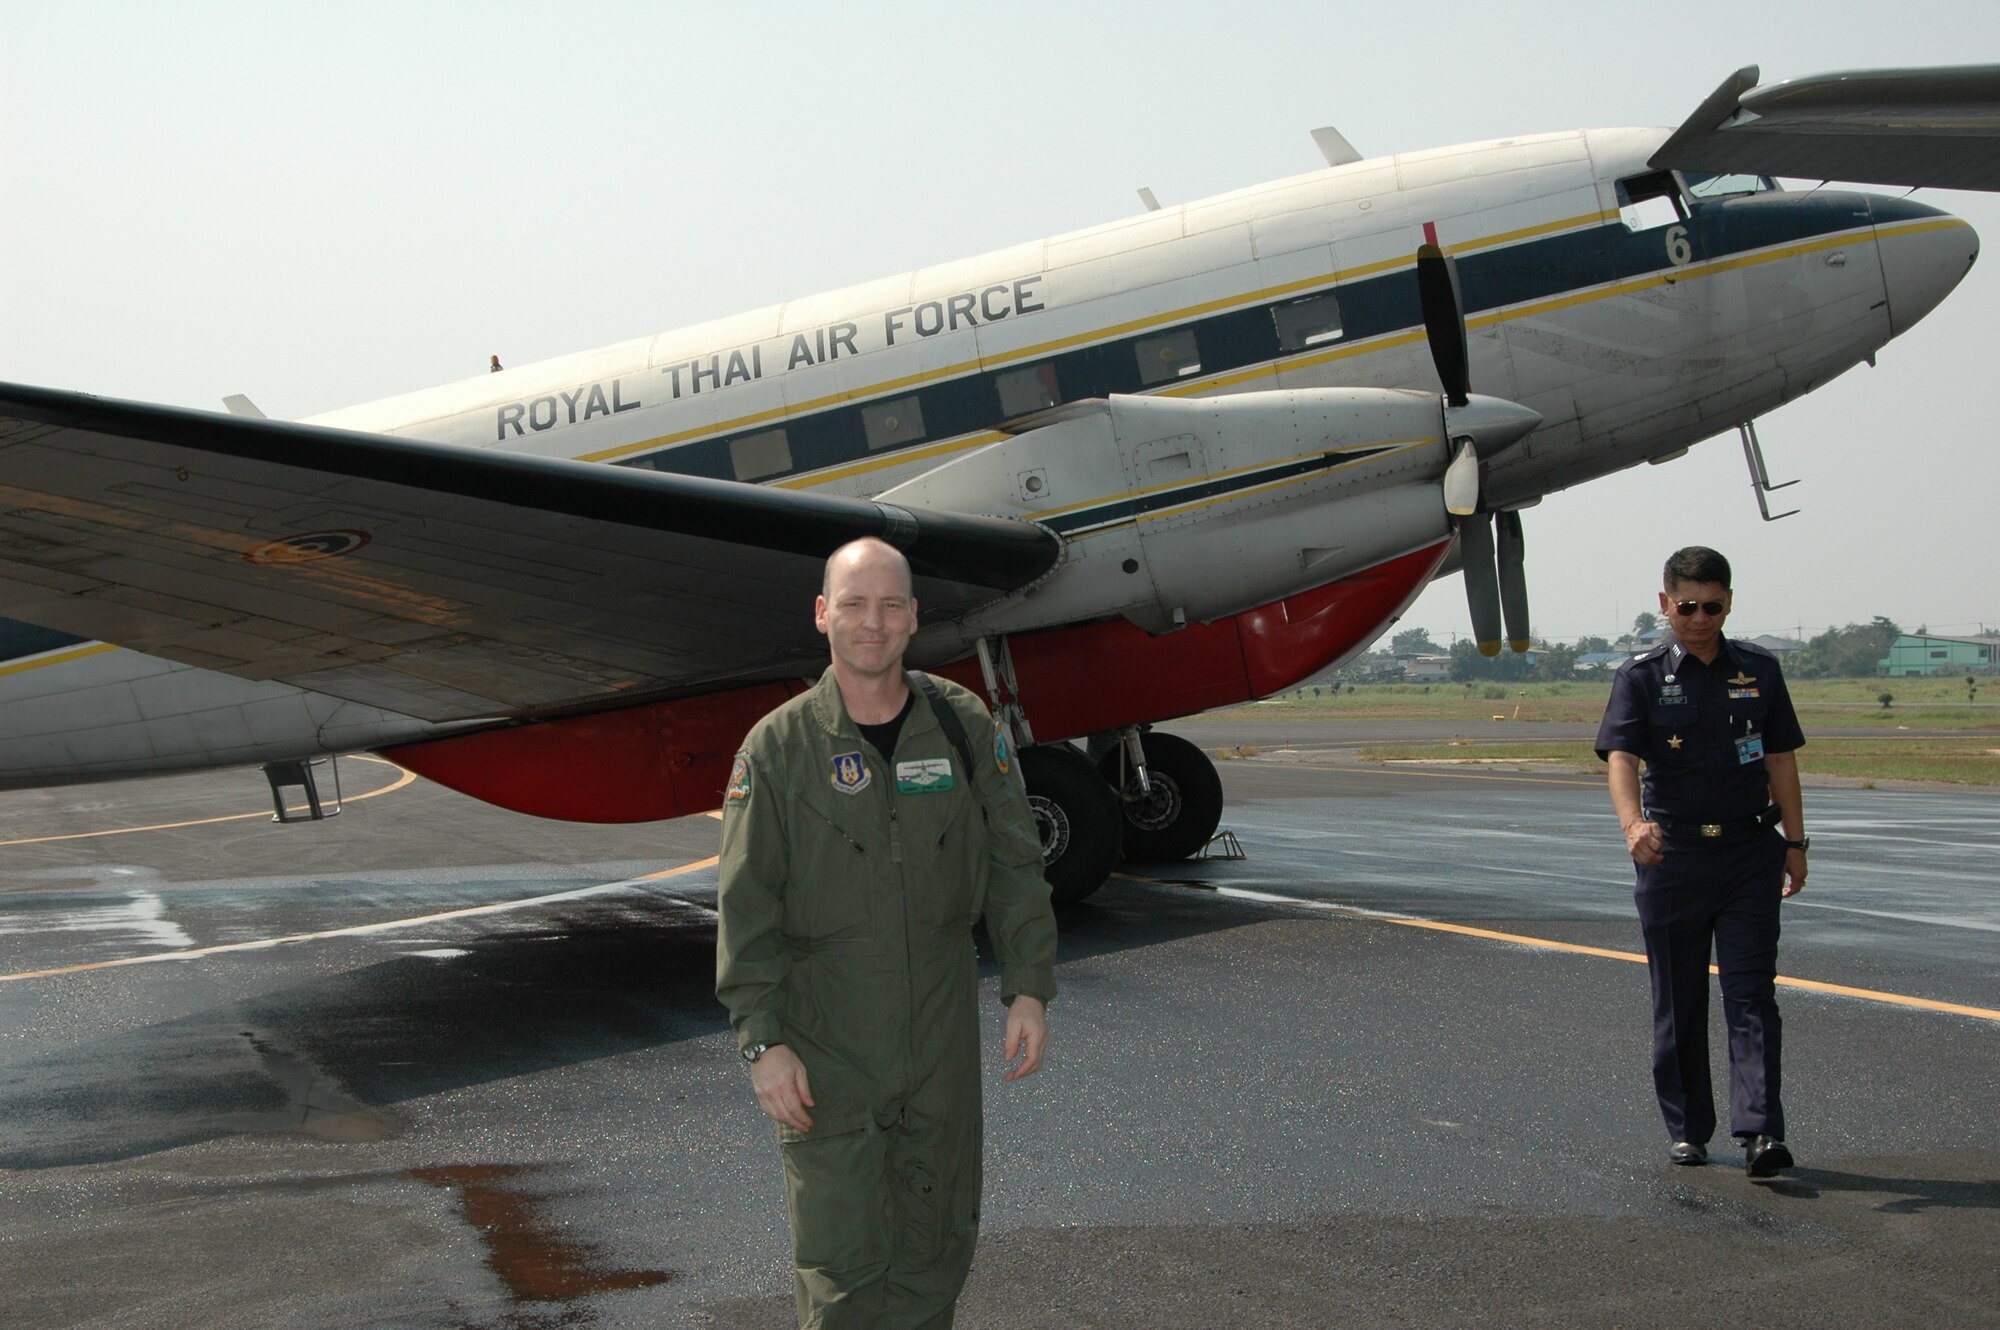 Chief Master Sgt. James D. Riley, chief loadmaster with the Air Force Reserve’s 302nd Airlift Wing steps away from a PT-47, a modified version of the DC-3 at Phitsanulok Royal Thai Air Force Base, Thailand.  As a child, Chief Riley visited the same aircraft with his Thai neighbor.  The Chief returned to Thailand as one of seven members of the Air Force Reserve’s 302 AW, based at Peterson AFB, Colo. to provide expert training to RTAF members on safe and effective C-130 MAFFS operations.  This event marks the first time the Air Force Reserve has sent delegates to train a foreign Air Force on use of the MAFFS equipment. (U.S. Air Force photo/Capt. Jody L. Ritchie)